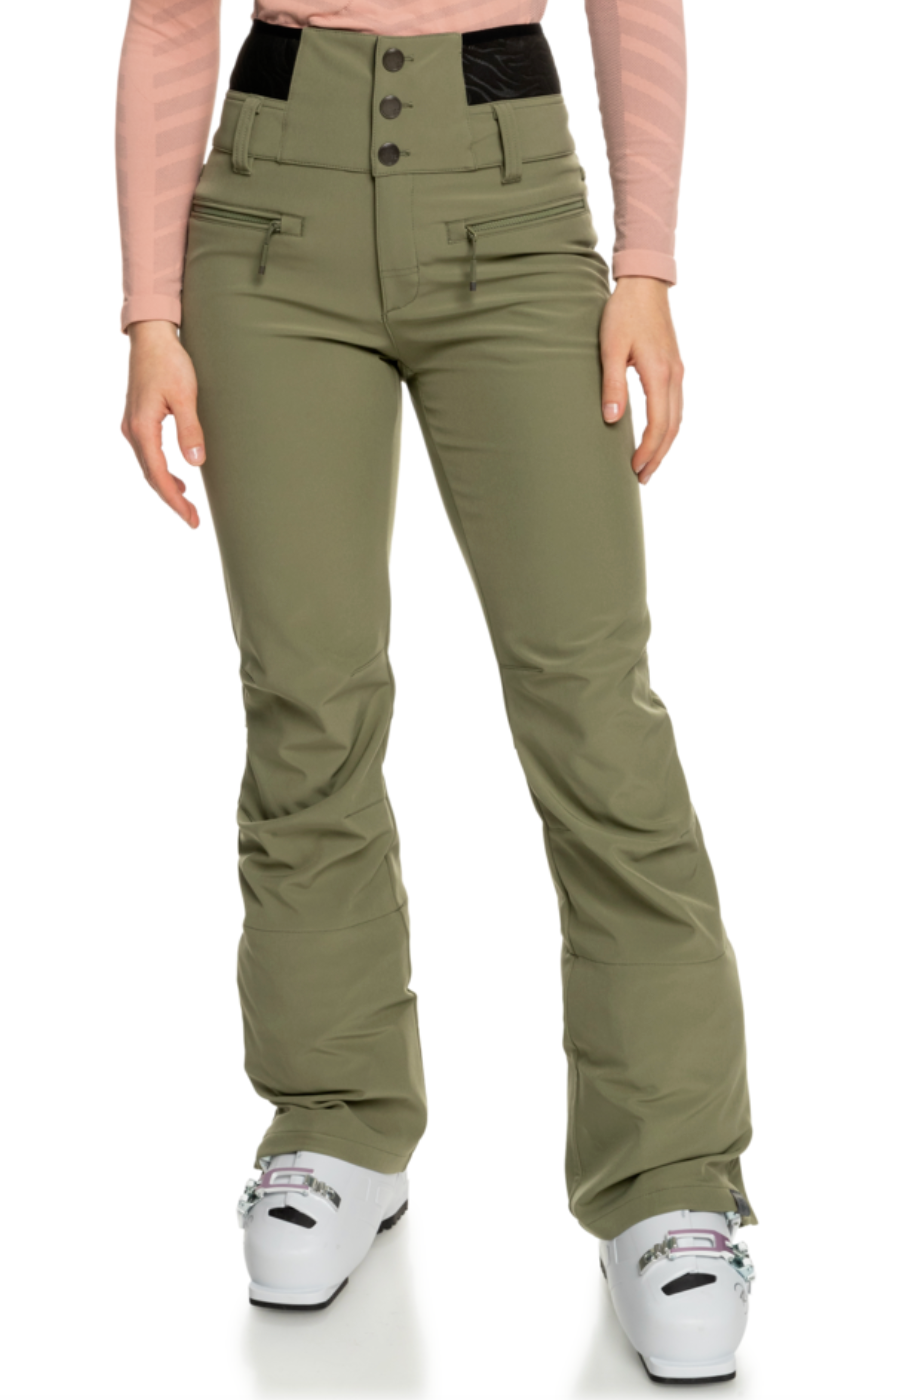 Womens Rising High Insulated Snow Pants